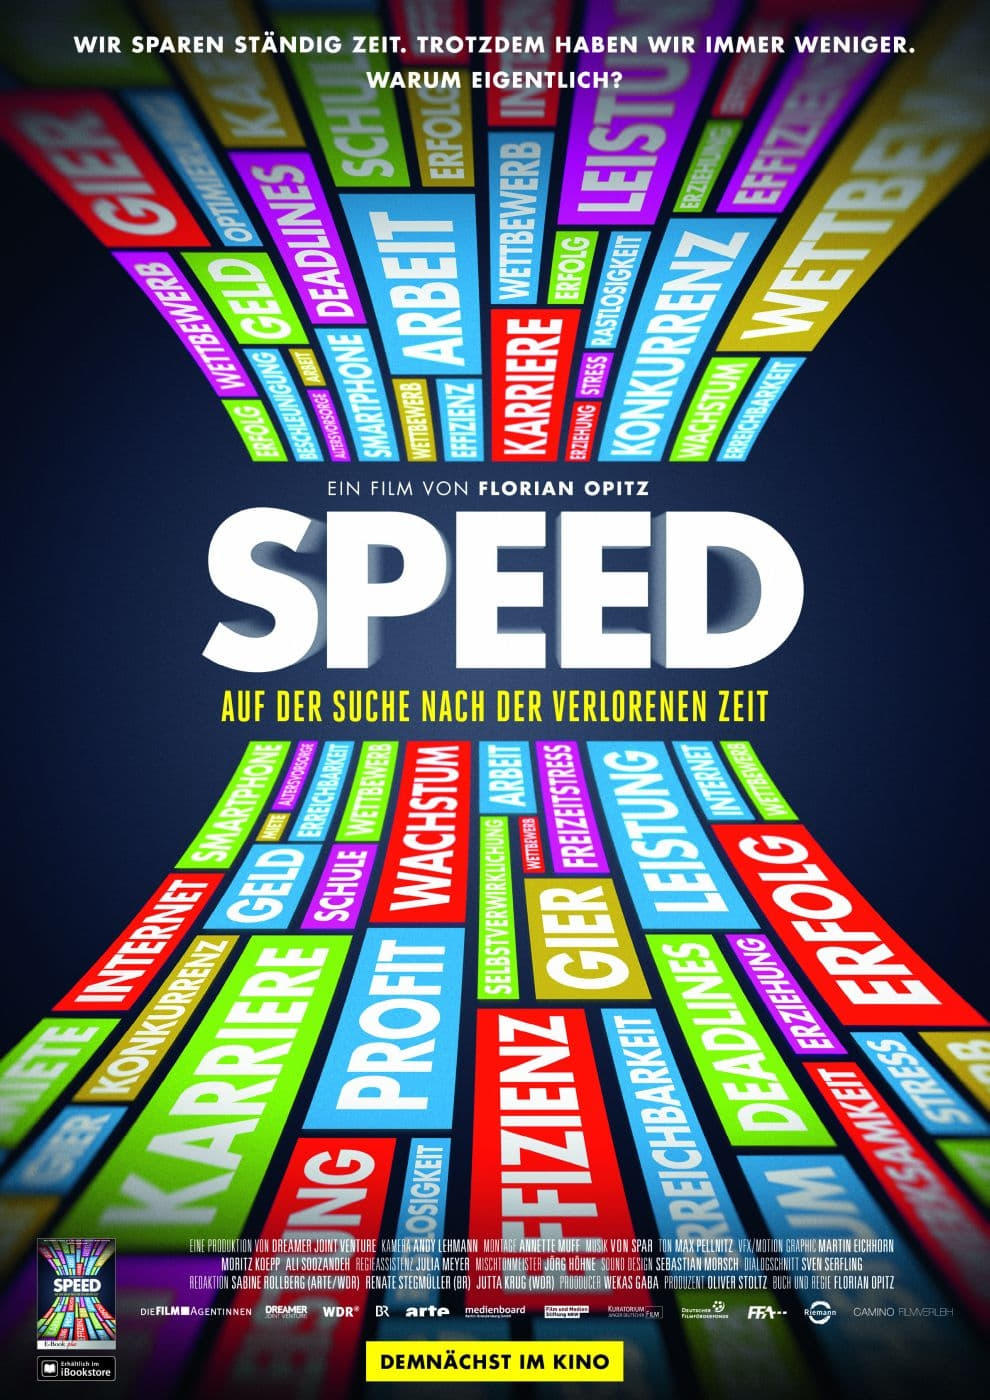 Speed: In search of lost time